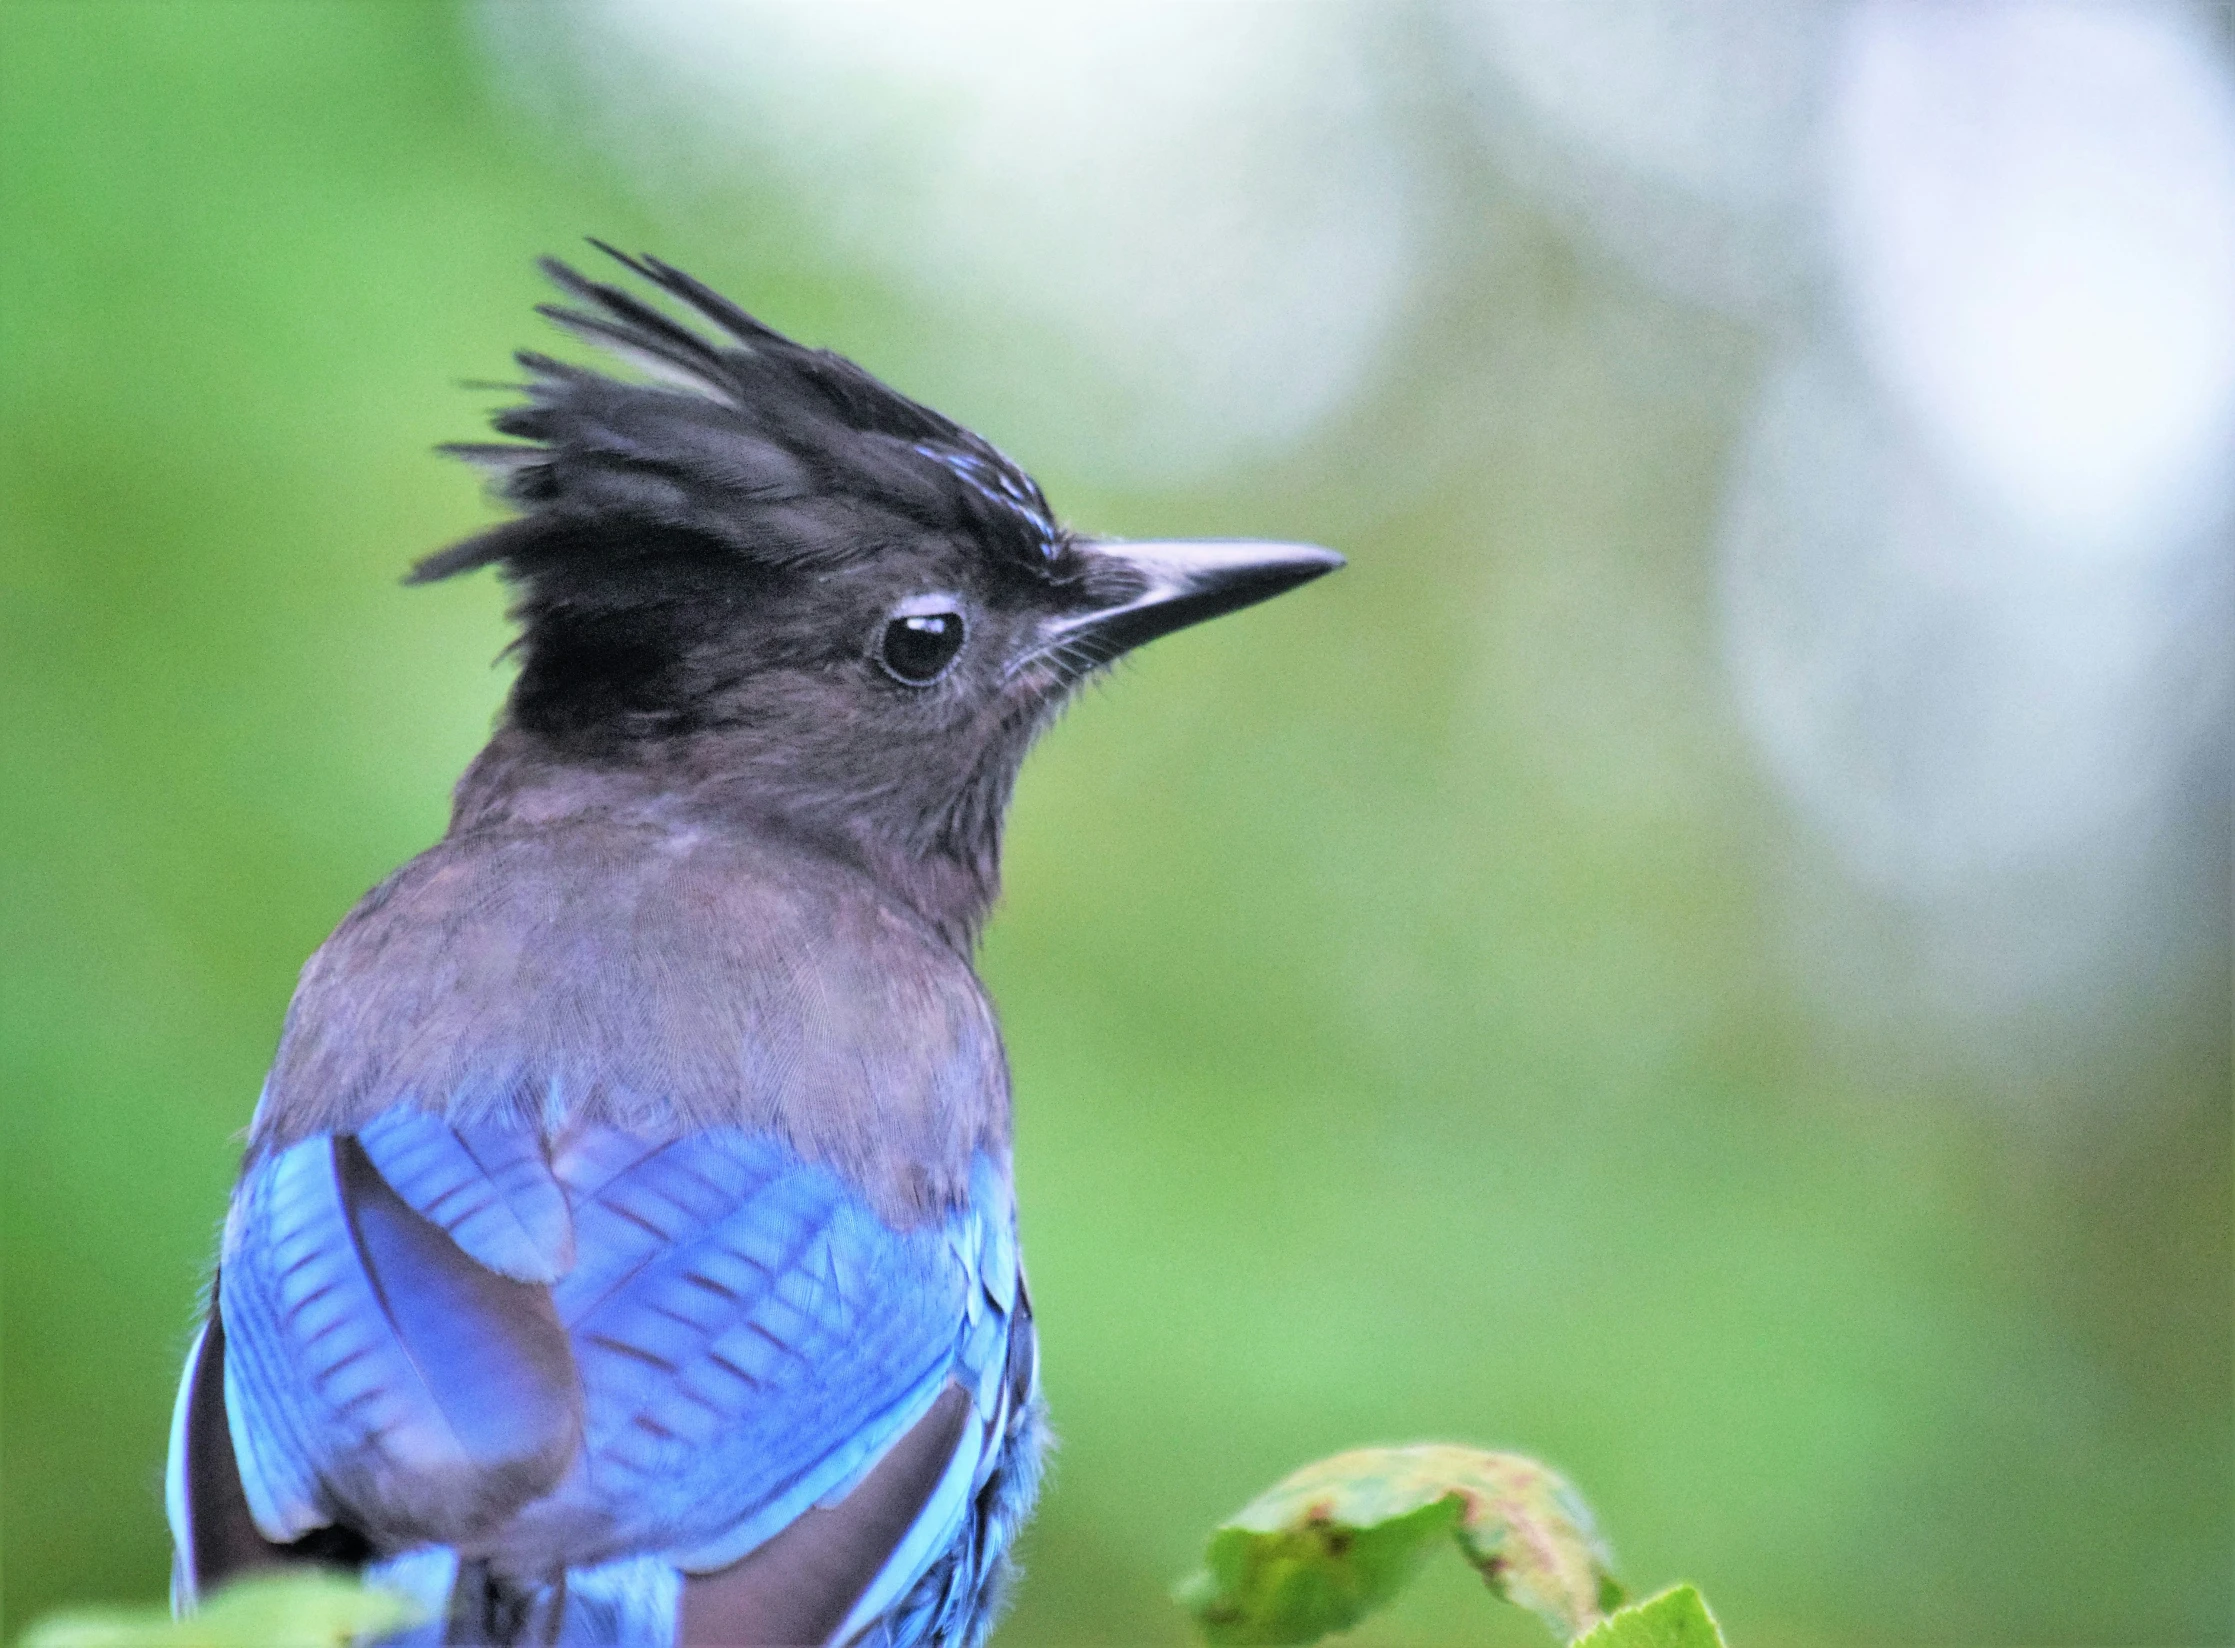 a small bird with dark feathers and a blue body